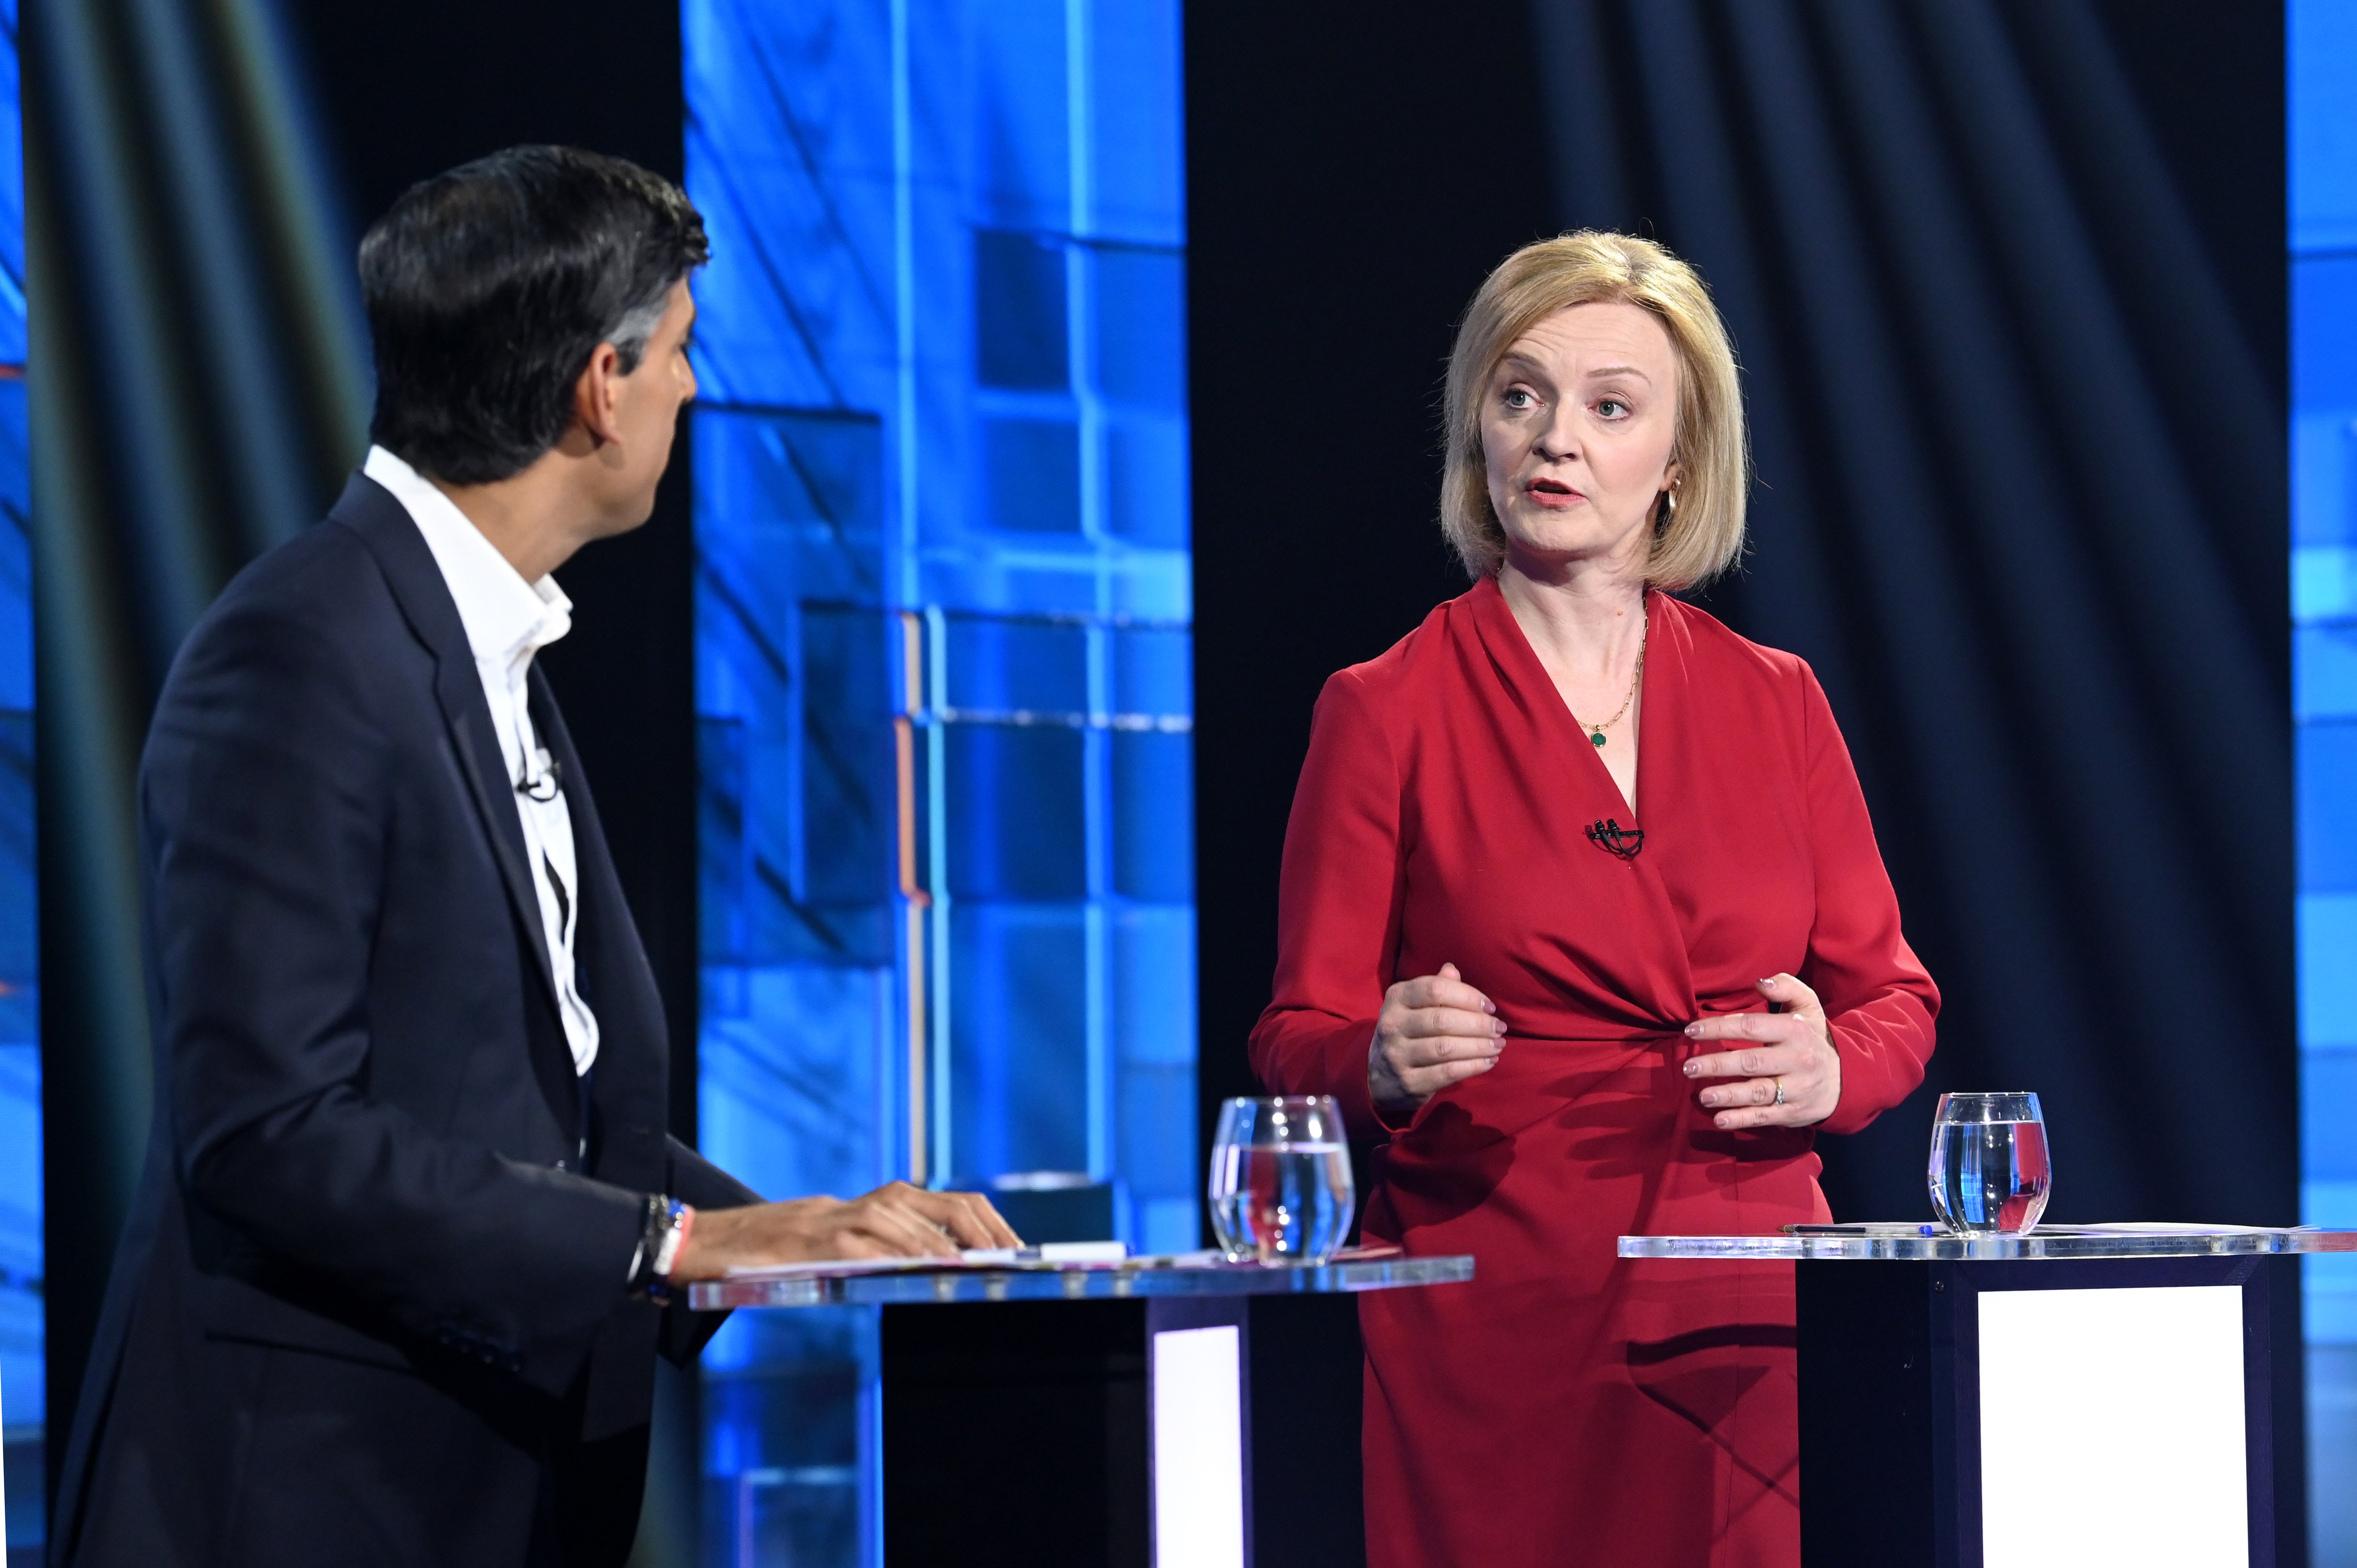 Mr Sunak and Ms Truss clashed during the debate (Jonathan Hordle/ITV/PA)